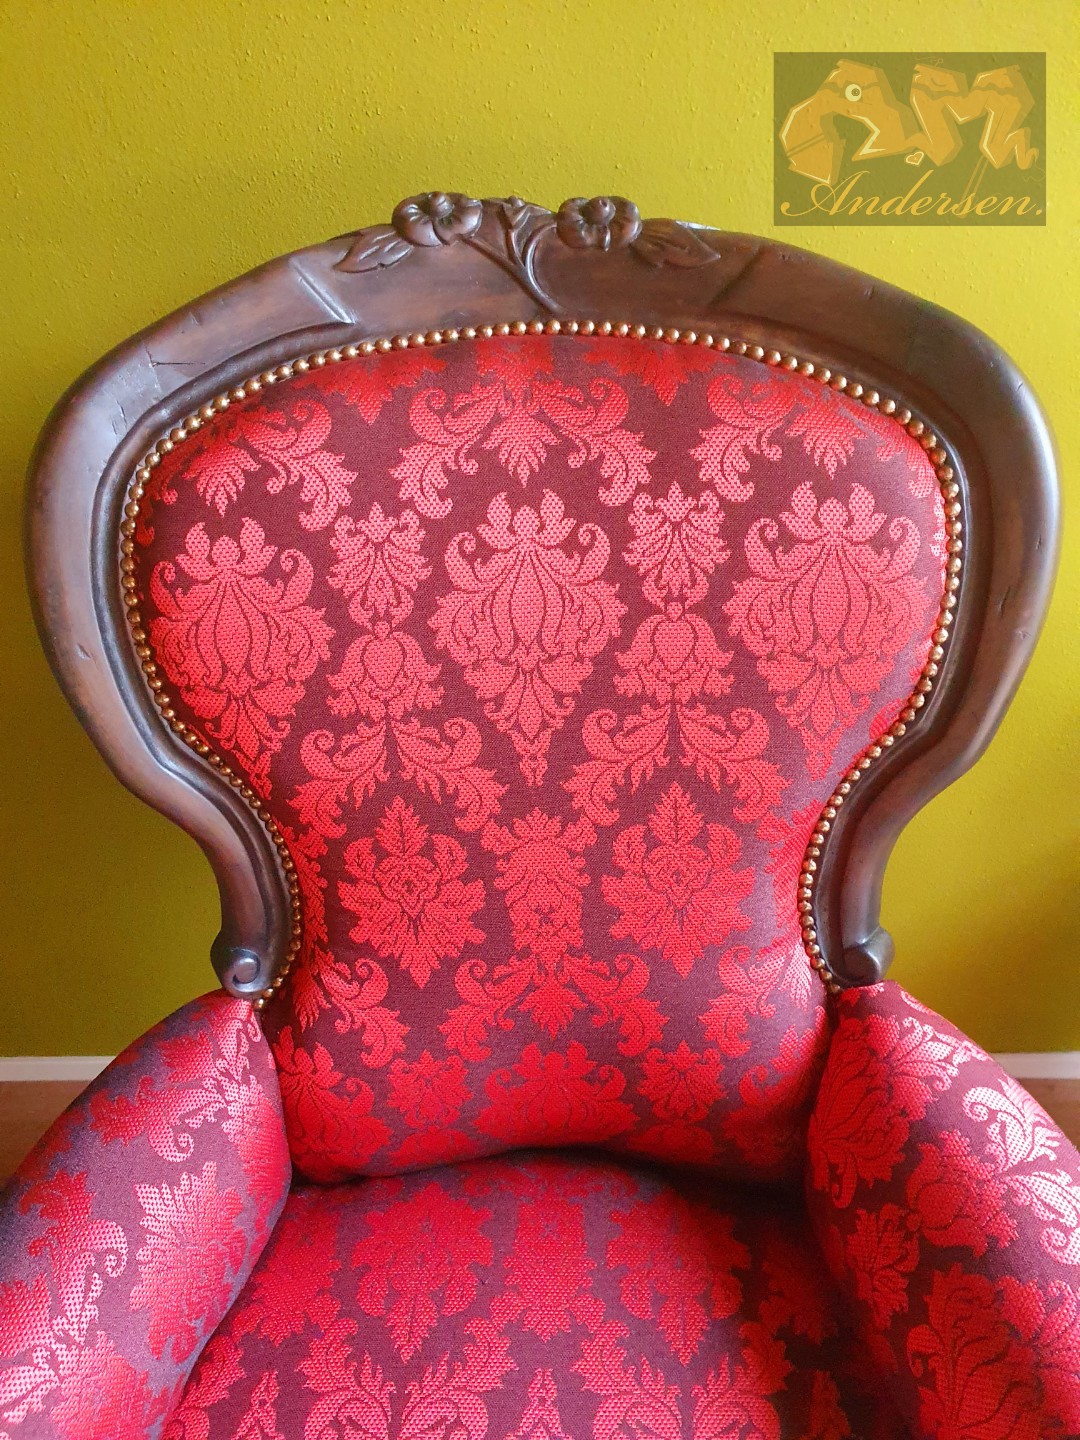 A.M. Andersen Voltaire fauteuil.